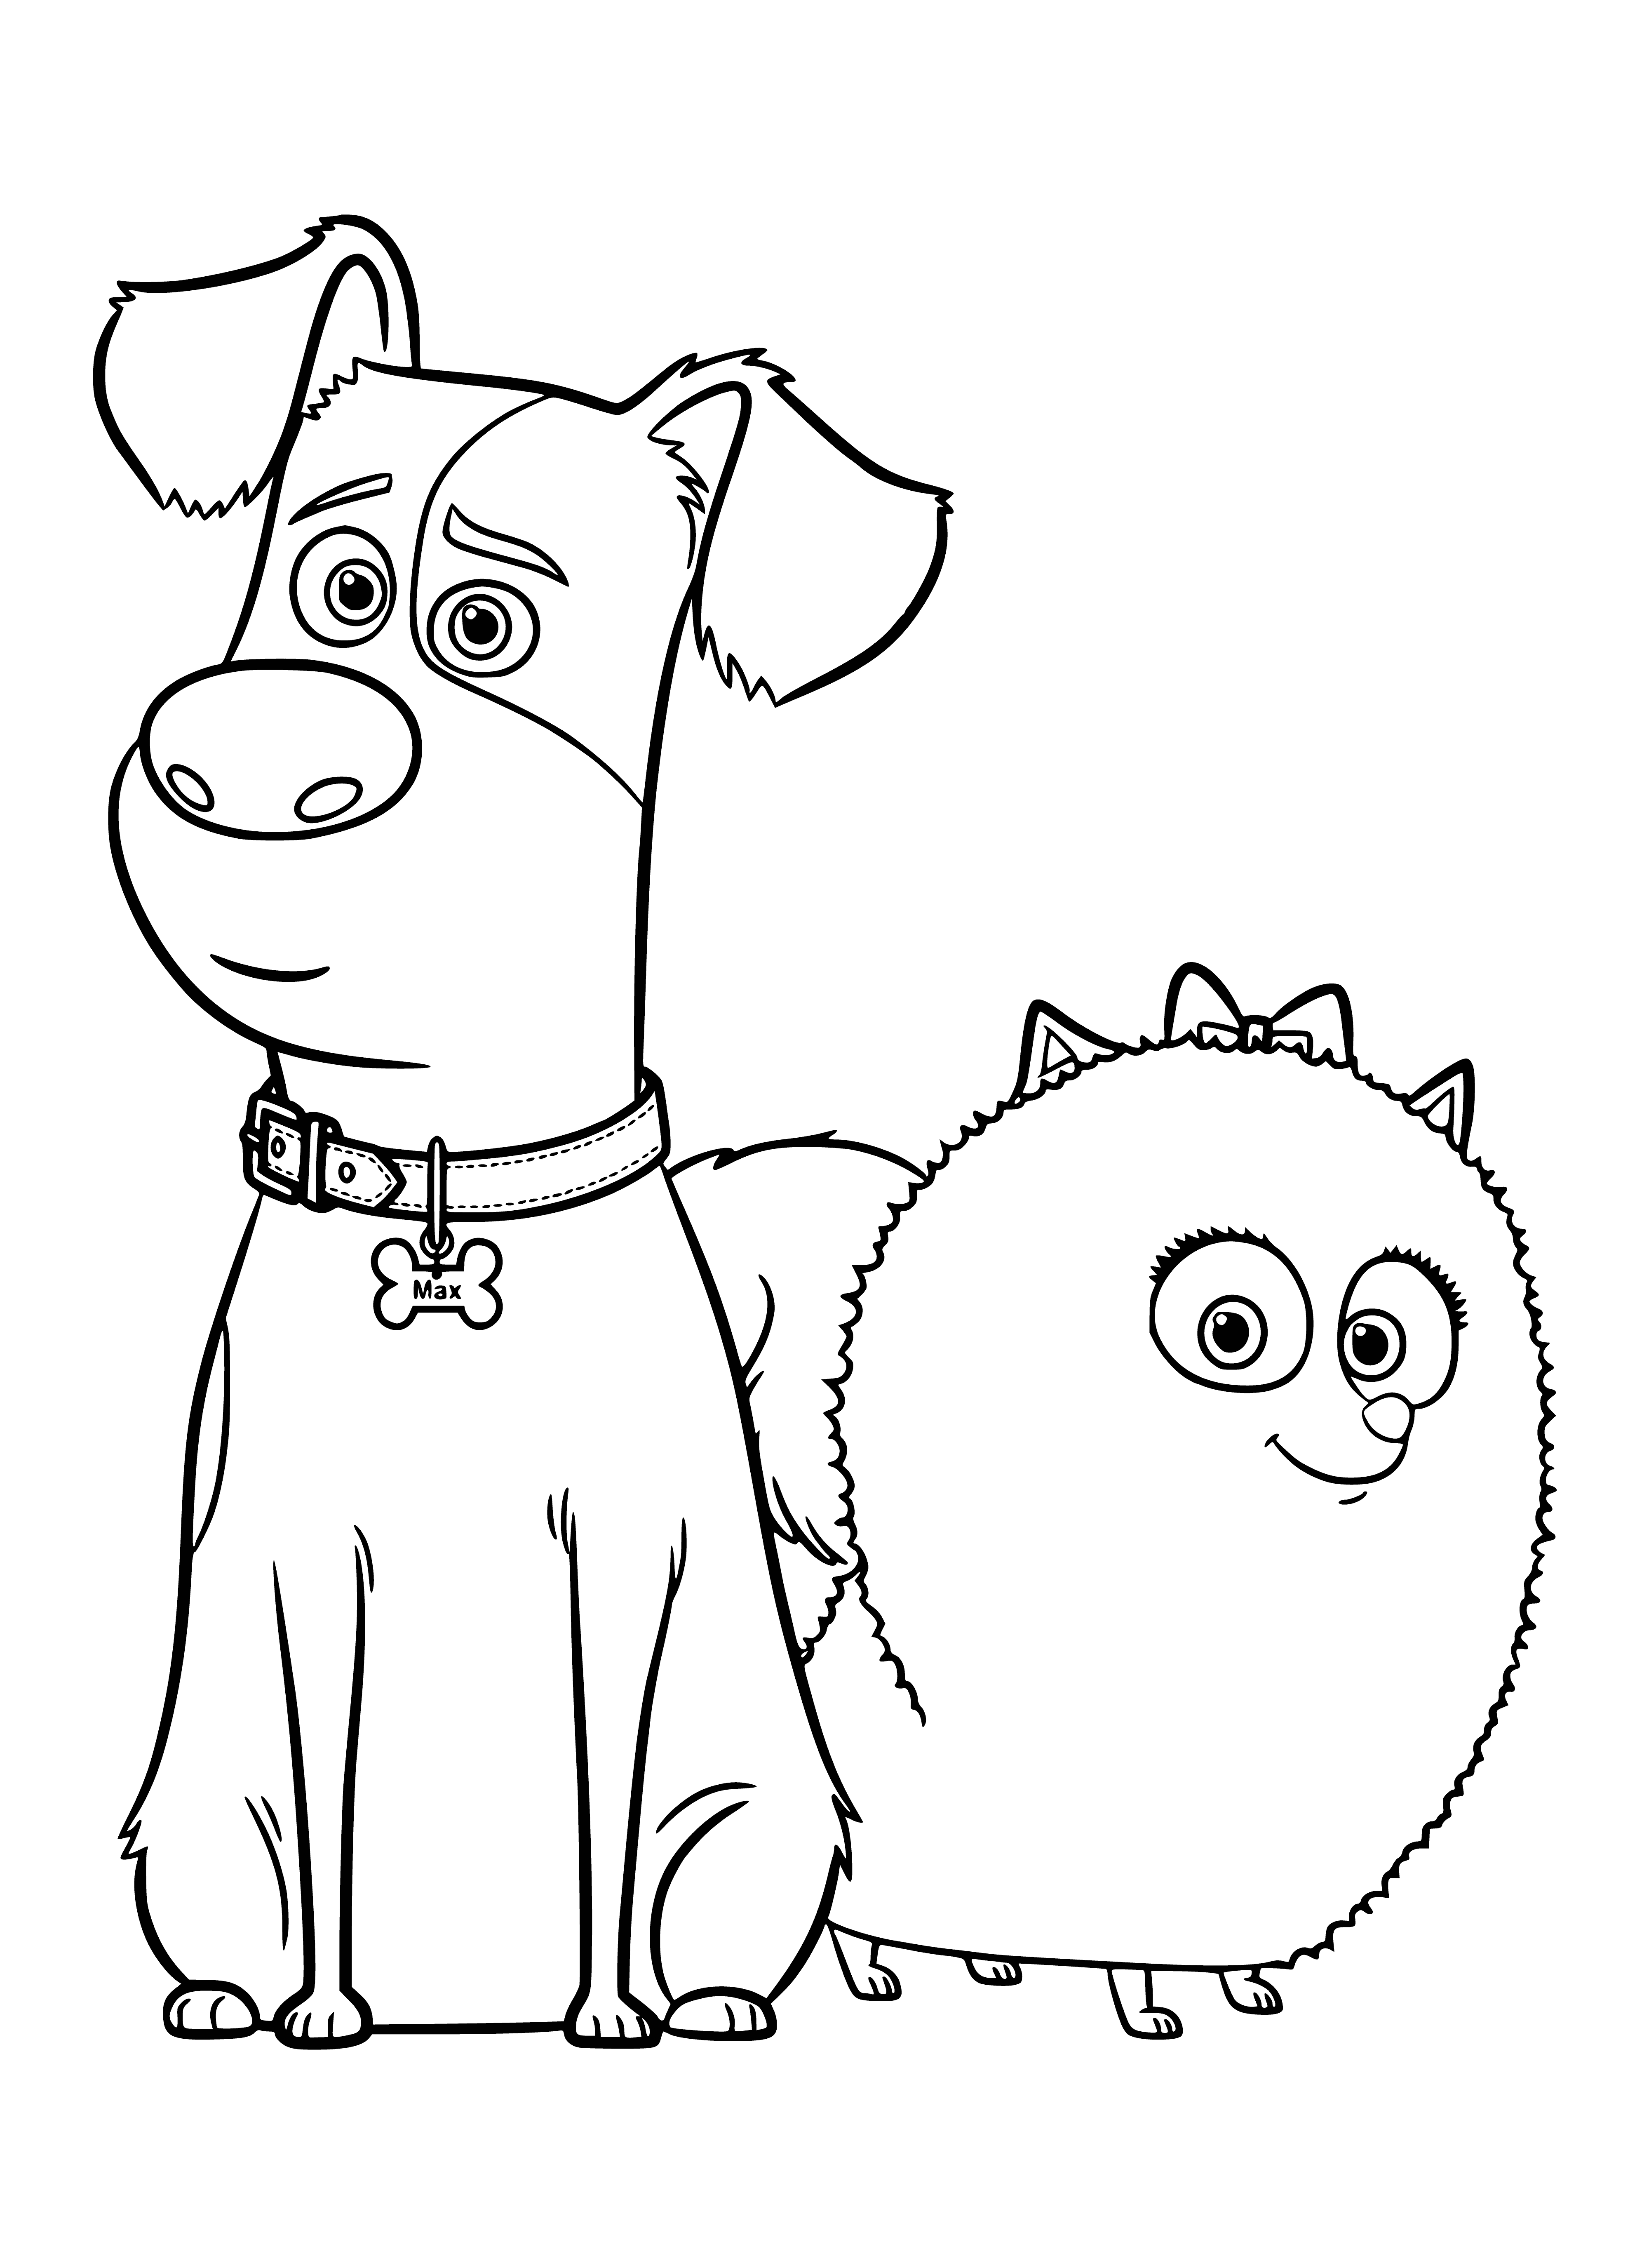 Max and Gidget coloring page